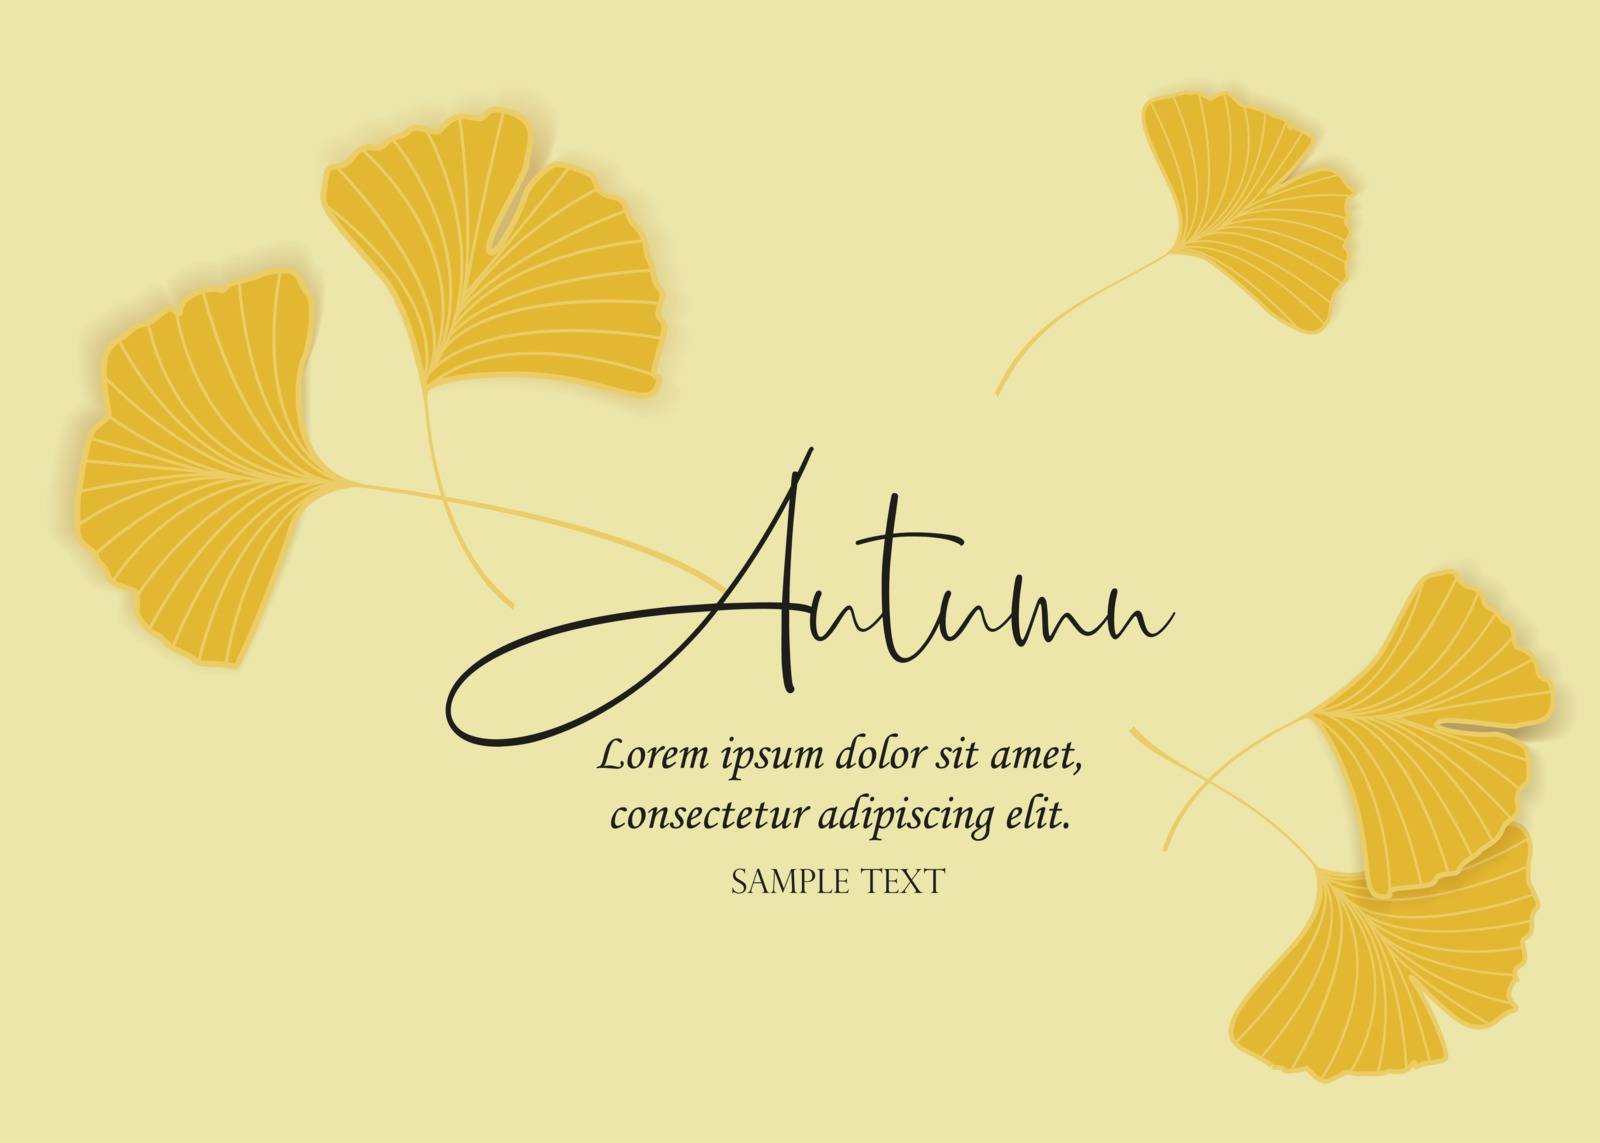 Vector Illustration ginkgo biloba leaves. Background with yellow leaves